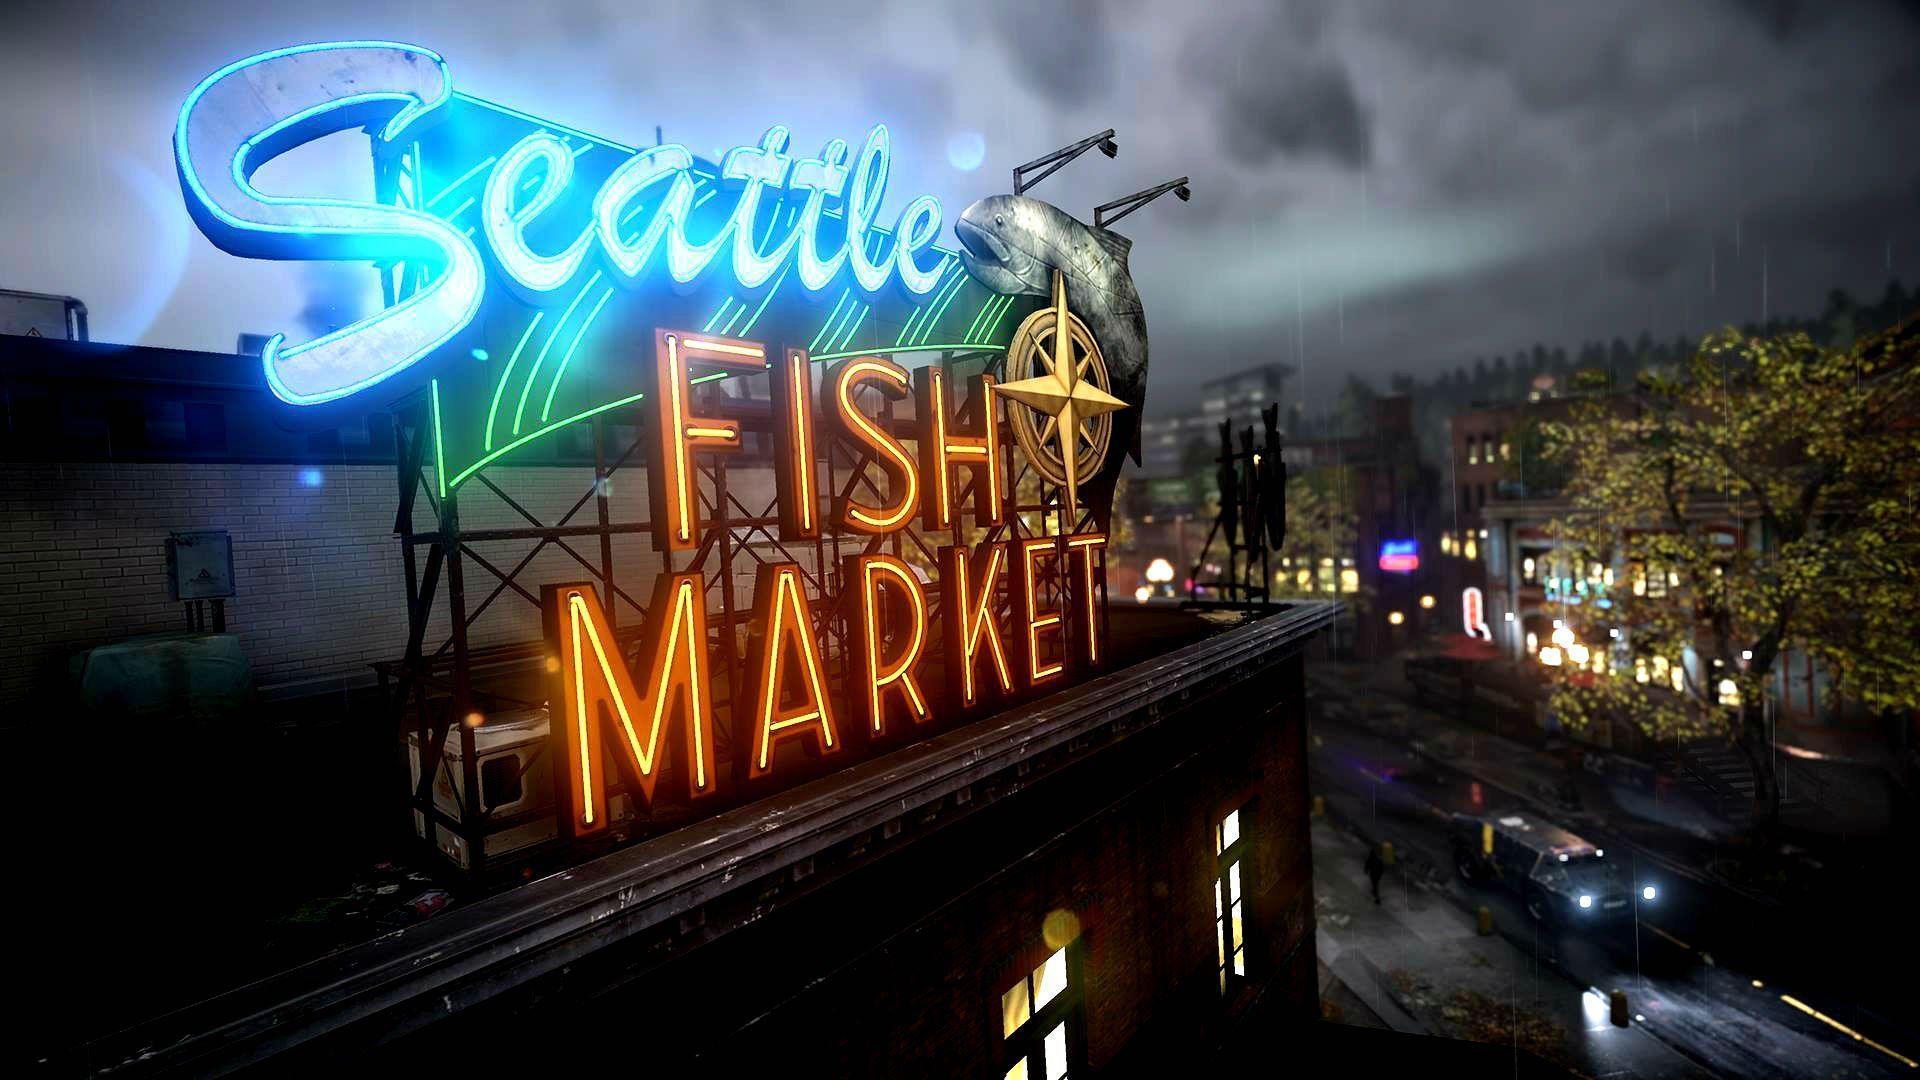 InFAMOUS SECOND SON Sci Fi Action Adventure City Sign Neon Seattle